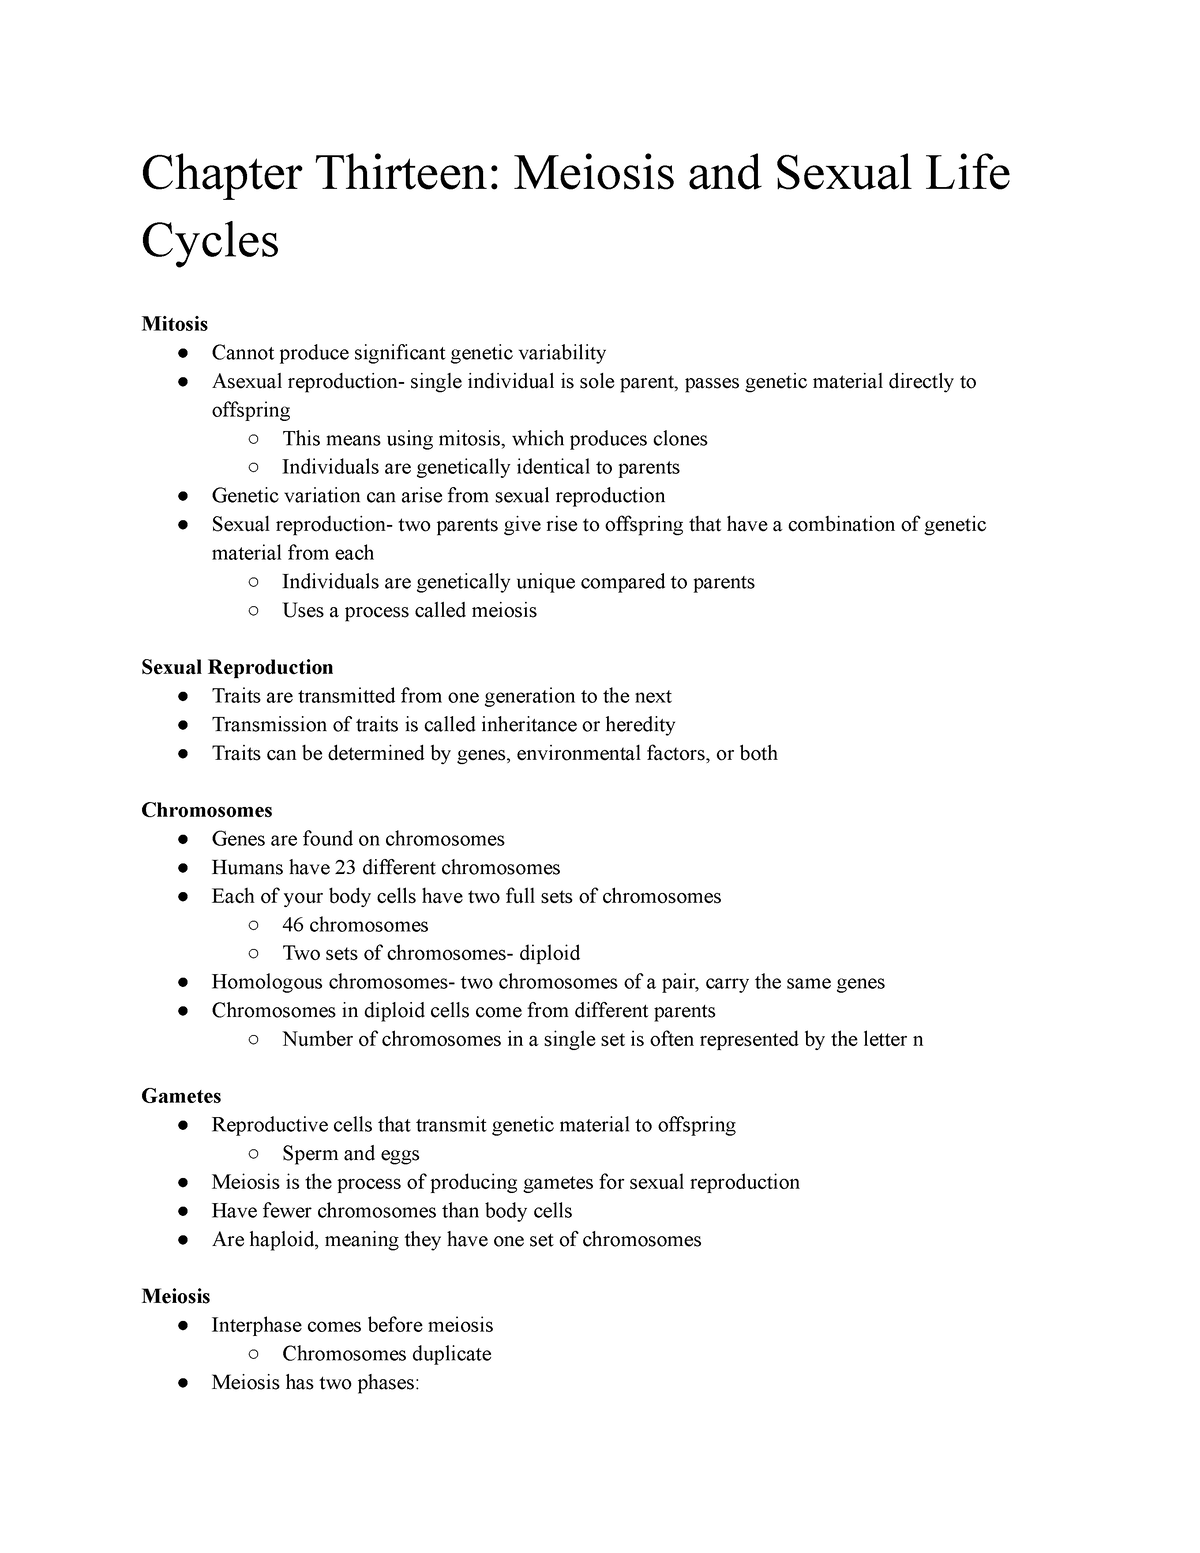 Bi 211 Chapter 13 Notes Chapter Thirteen Meiosis And Sexual Life Cycles Mitosis Cannot 7930